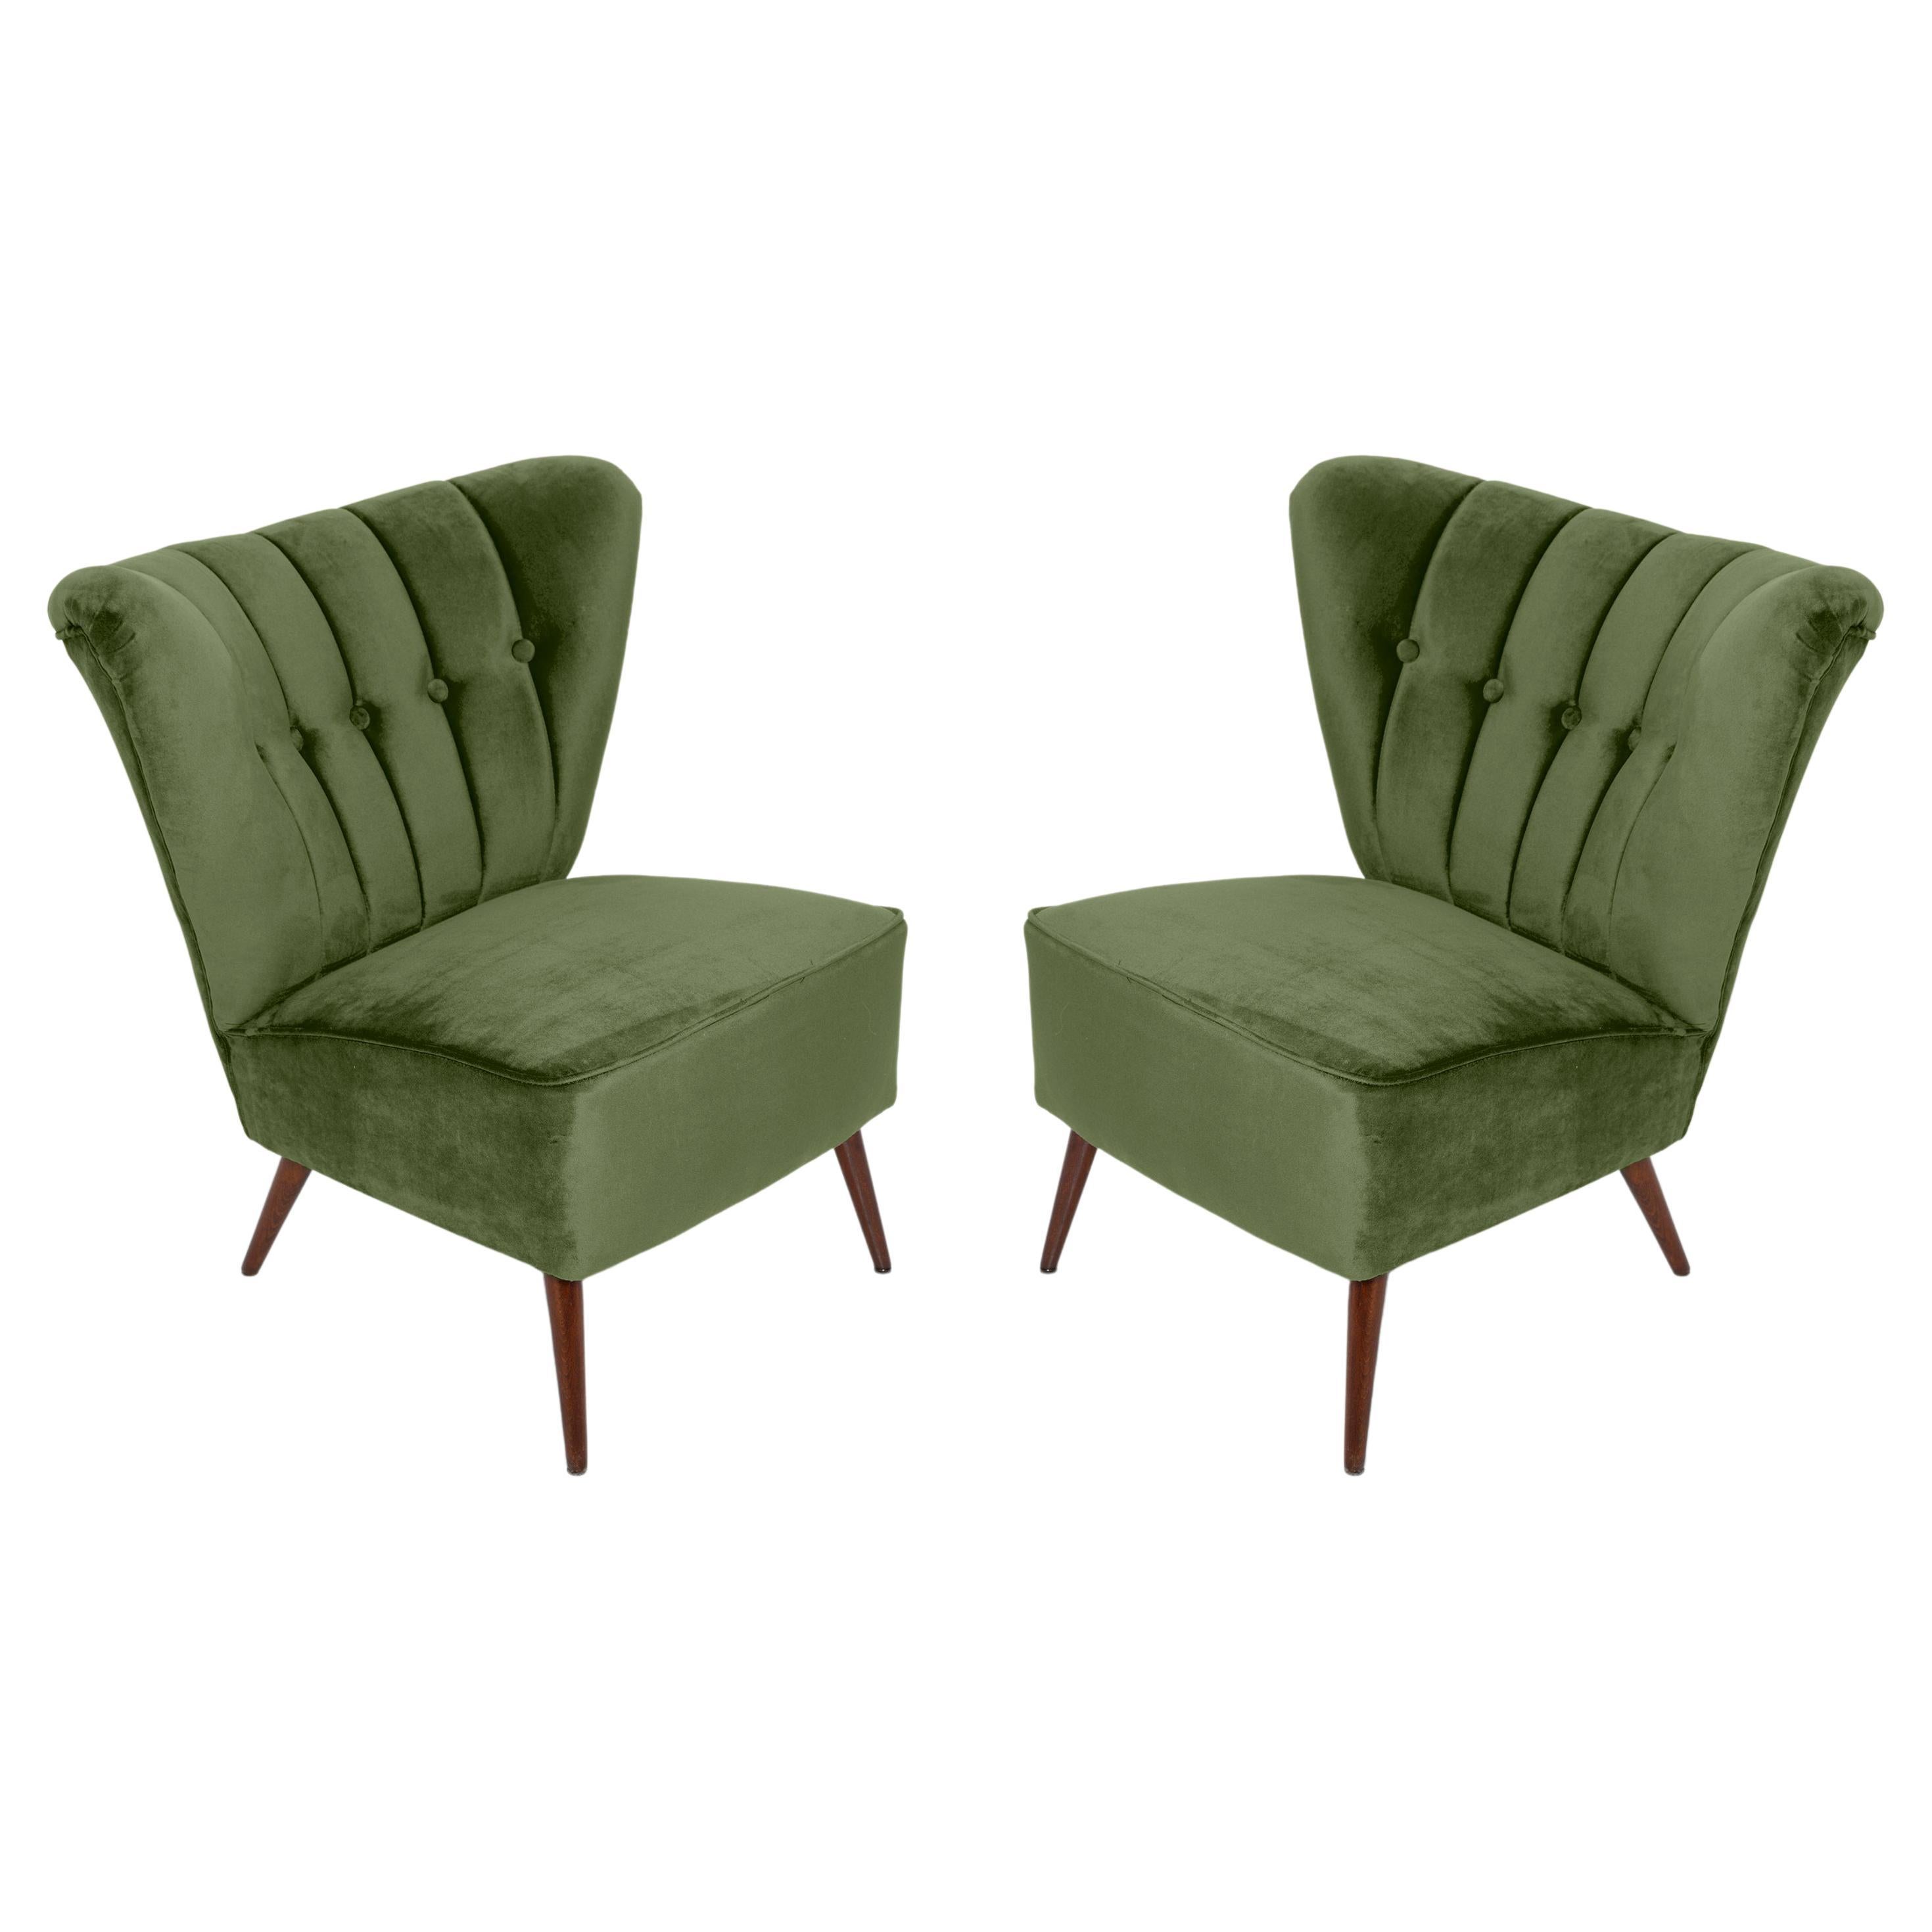 Set of Two Mid-Century Green Velvet Club Armchairs, Europe, 1960s For Sale